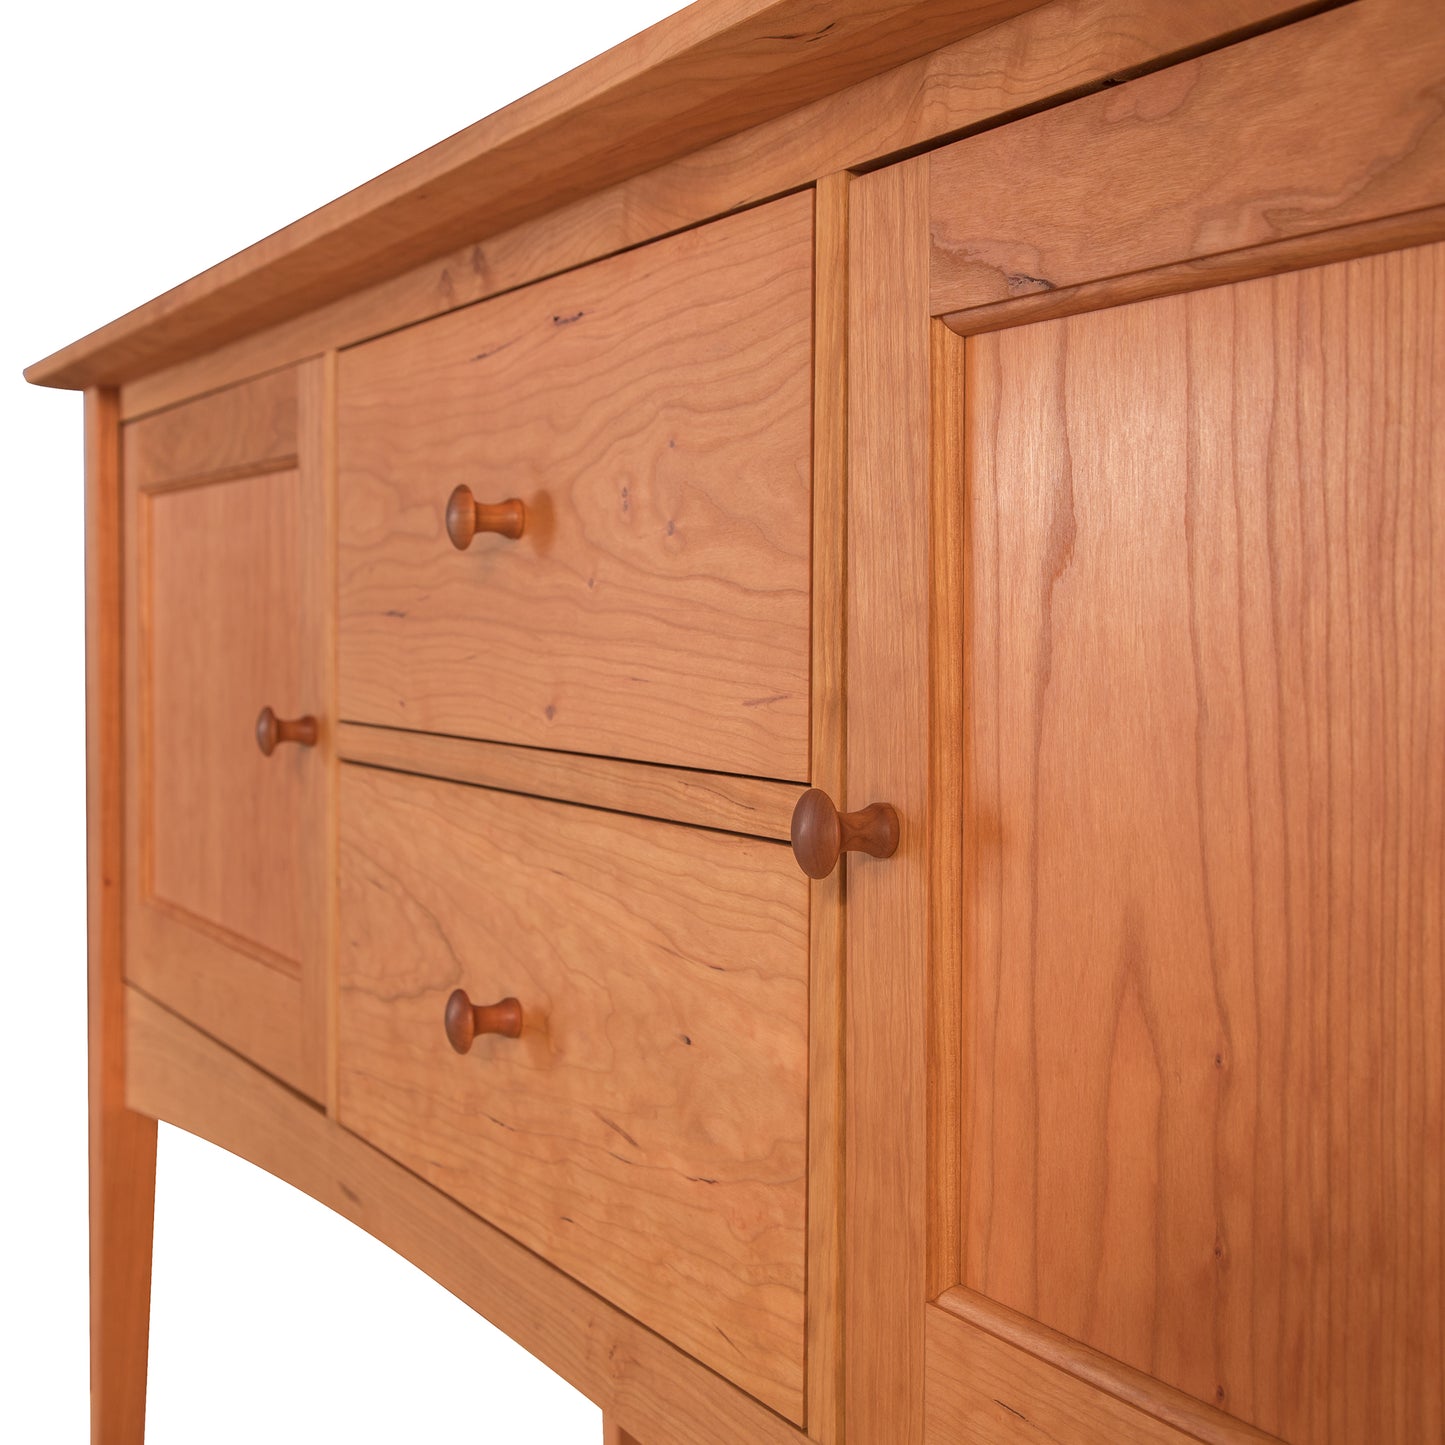 Close-up view of an American Shaker Huntboard featuring multiple drawers with round knobs, crafted from solid hardwood construction with visible grain, isolated against a light background by Maple Corner Woodworks.